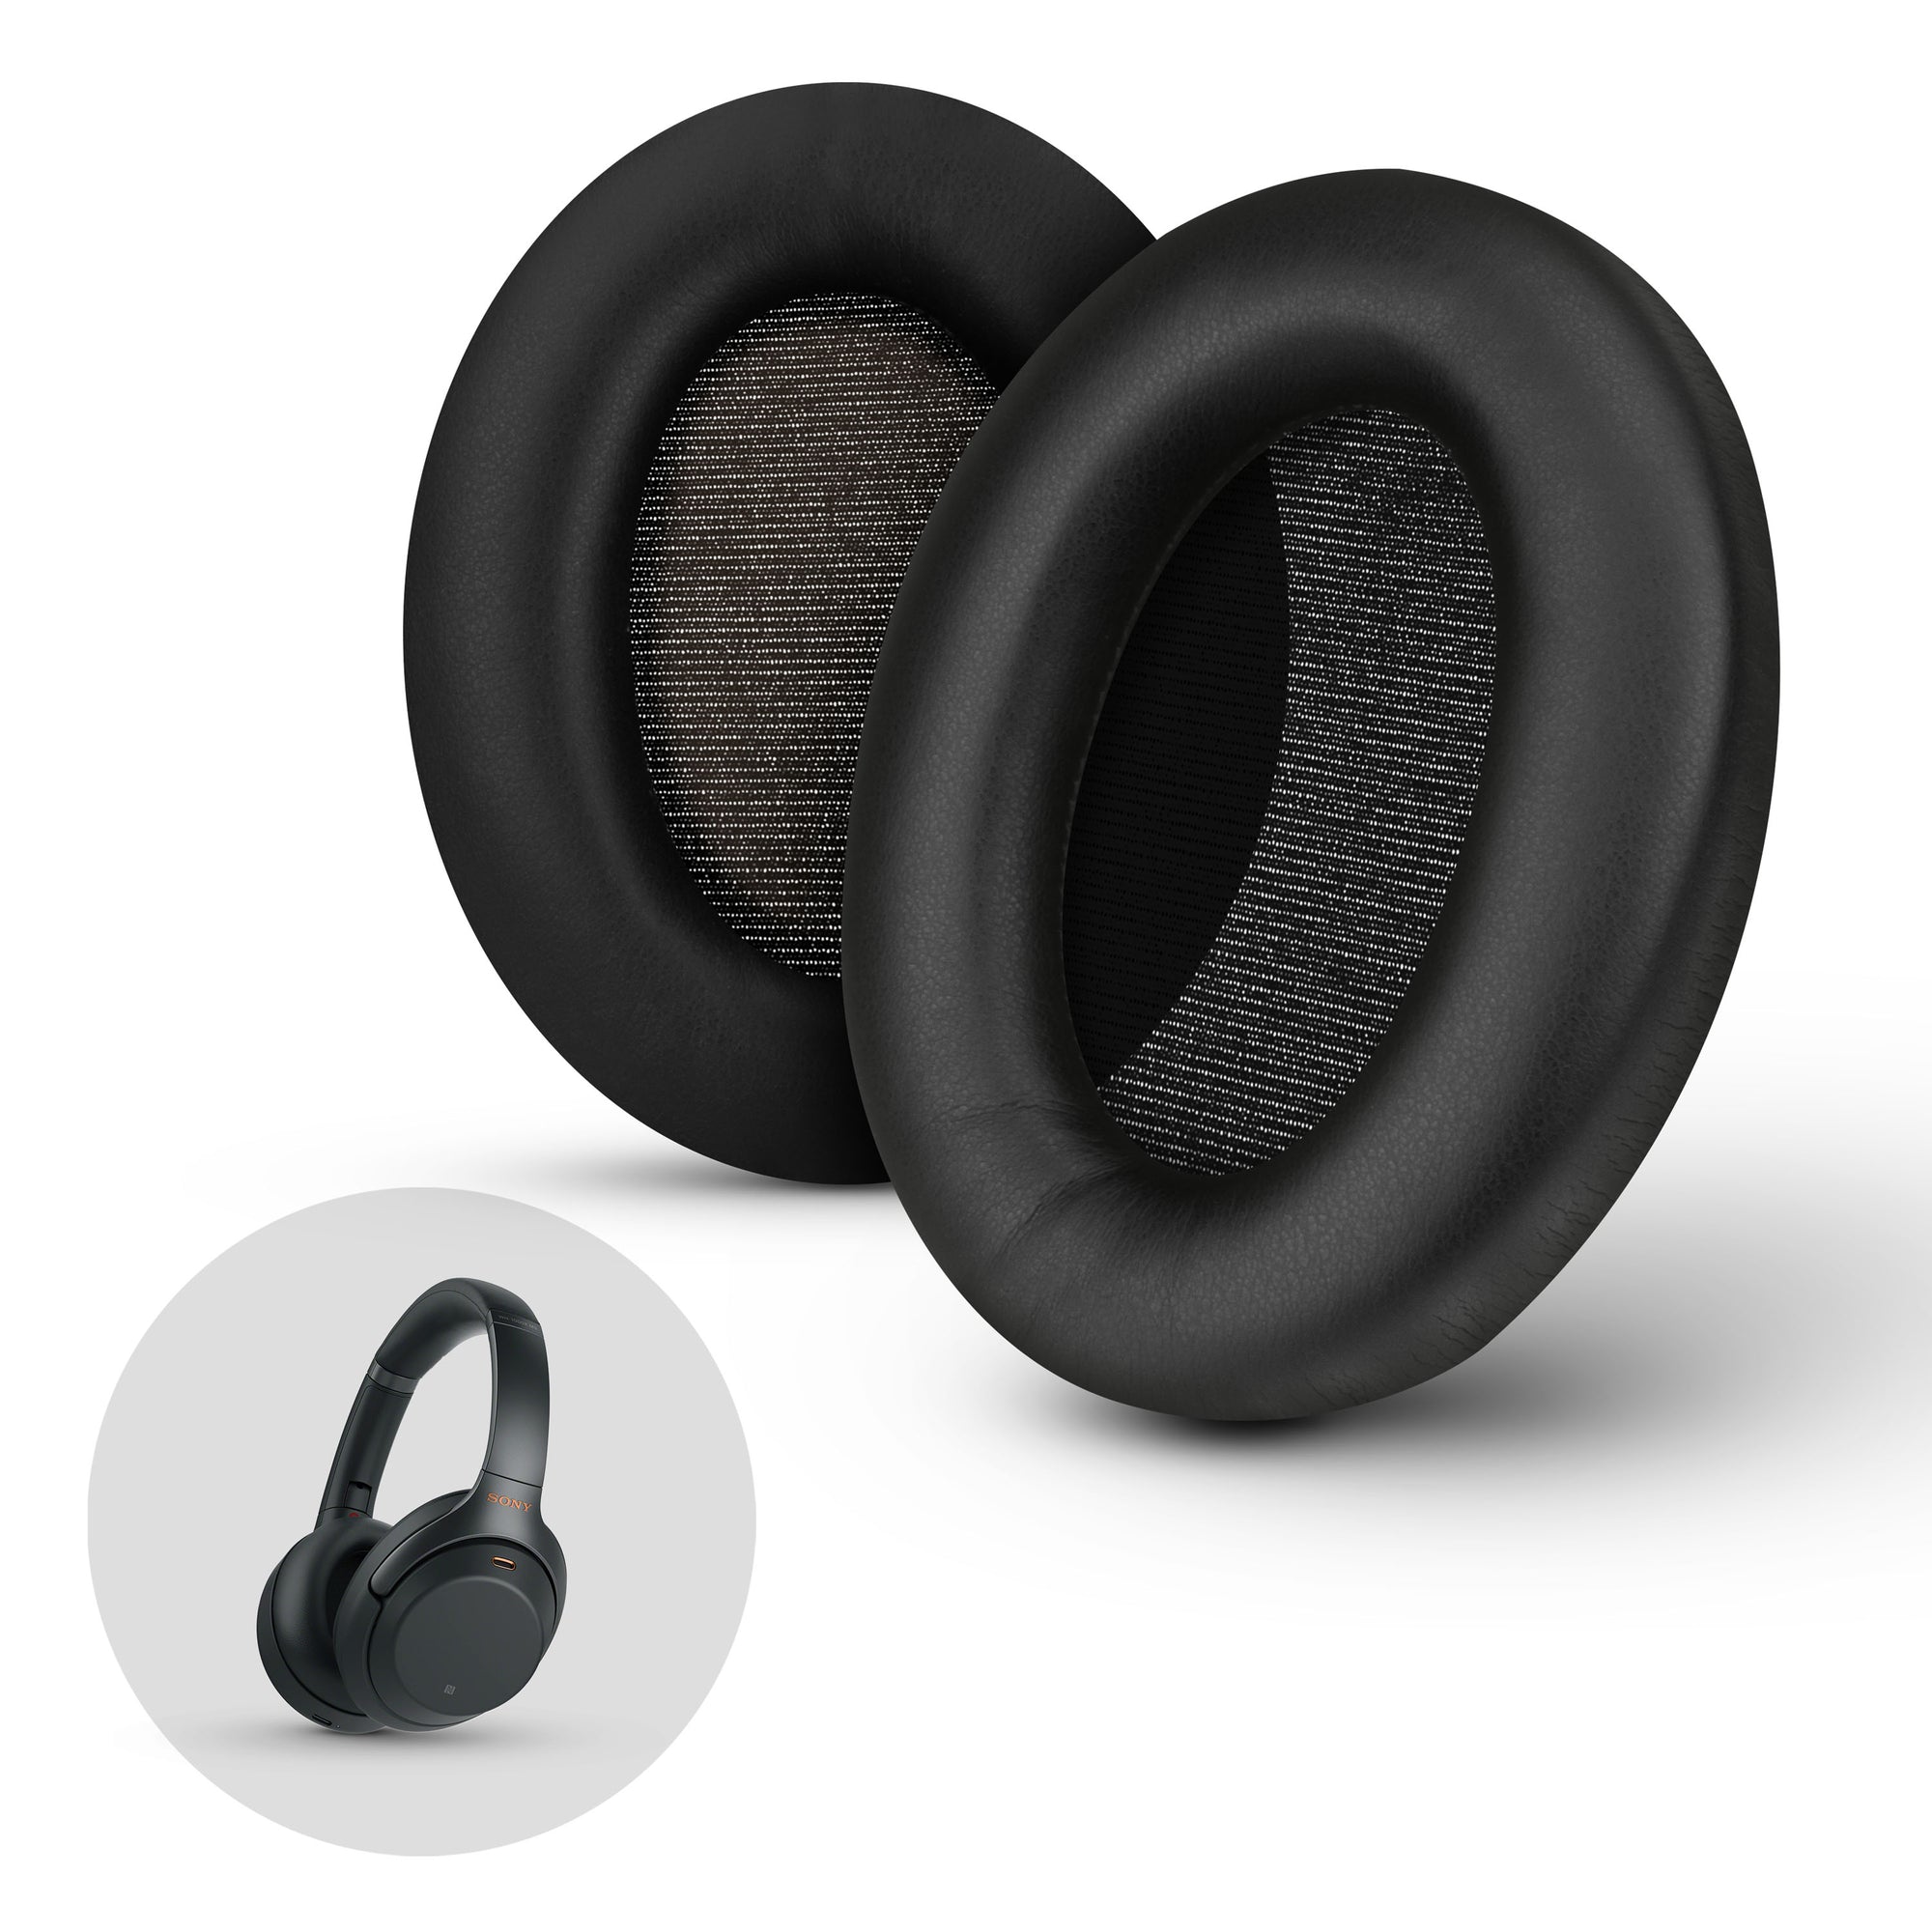 Sony WH-1000XM3 Replacement Earpads - Soft PU Leather & Memory Foam Ear Pad Cushions For Extra Comfort, Easy & Quick Installation